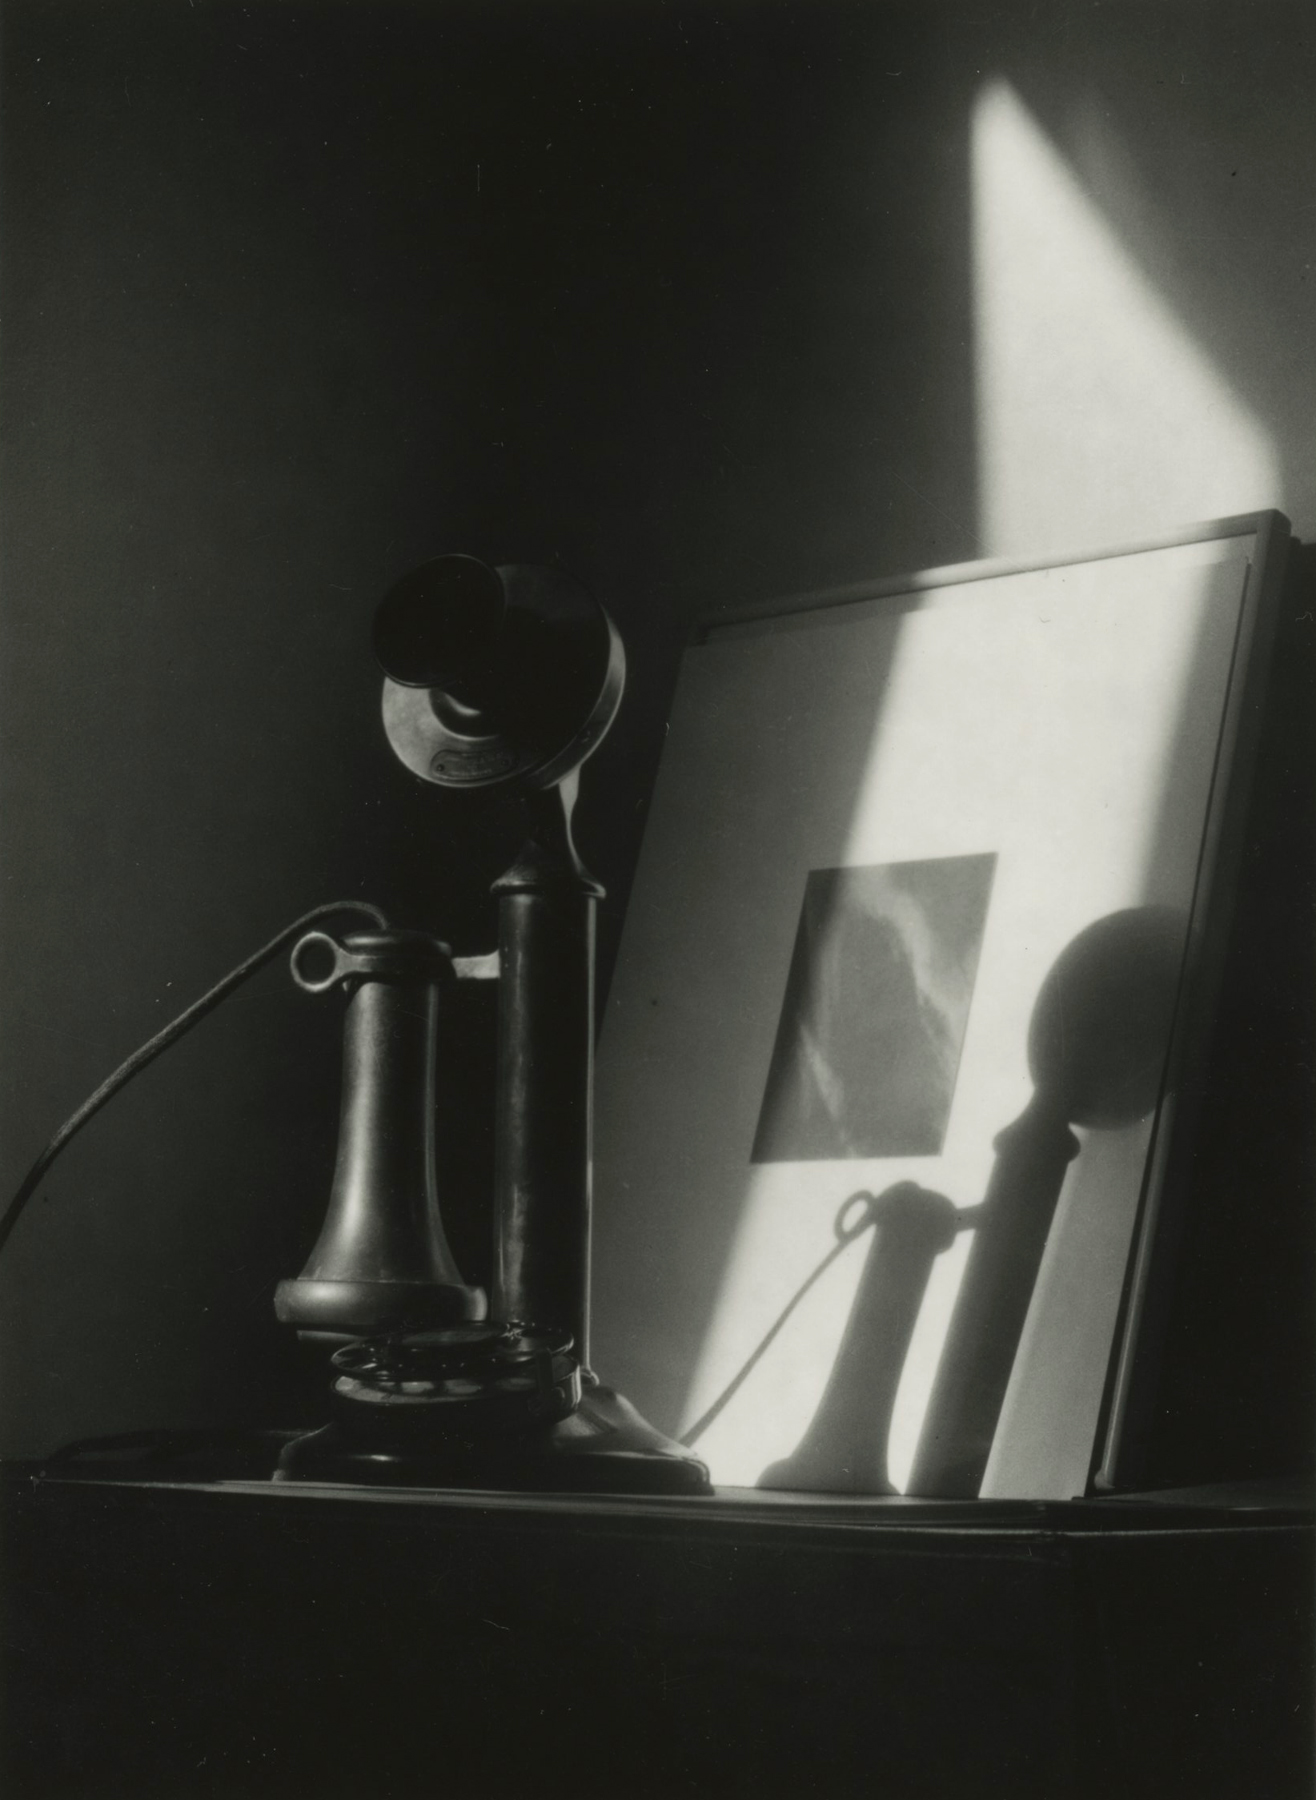 Telephone, in front of Alfred Stieglitz "Equivalent," at An American Place, New York, c. 1940